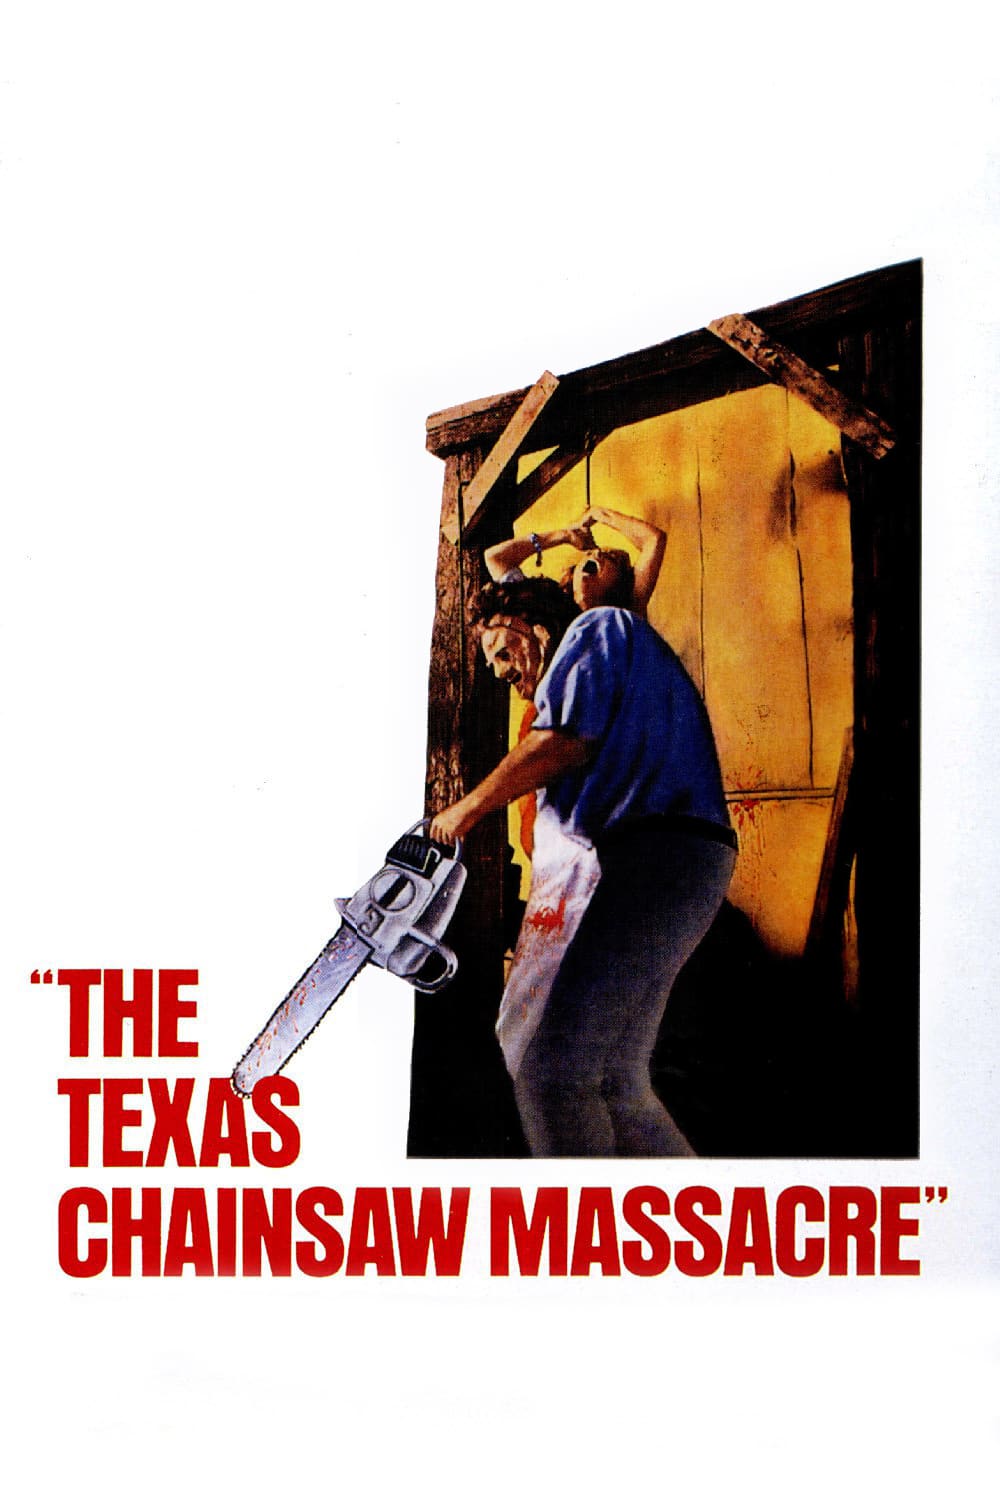 The Texas Chainsaw Massacre (1974) Movie Poster Framed or Unframed Glossy Poster Free UK Shipping!!!